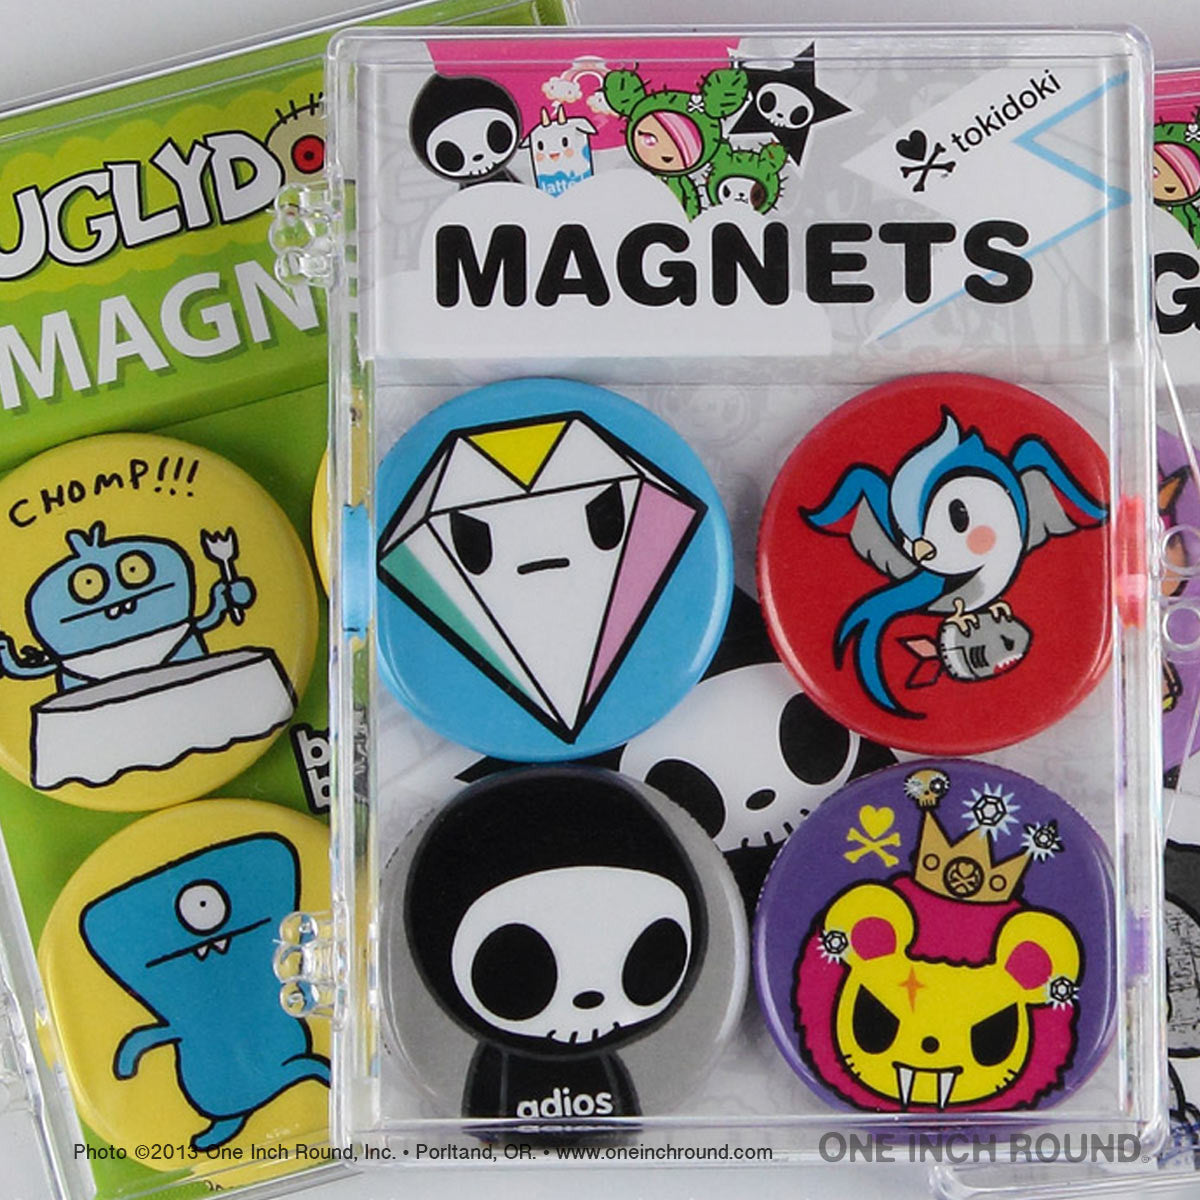 1 Inch Magnets China Trade,Buy China Direct From 1 Inch Magnets